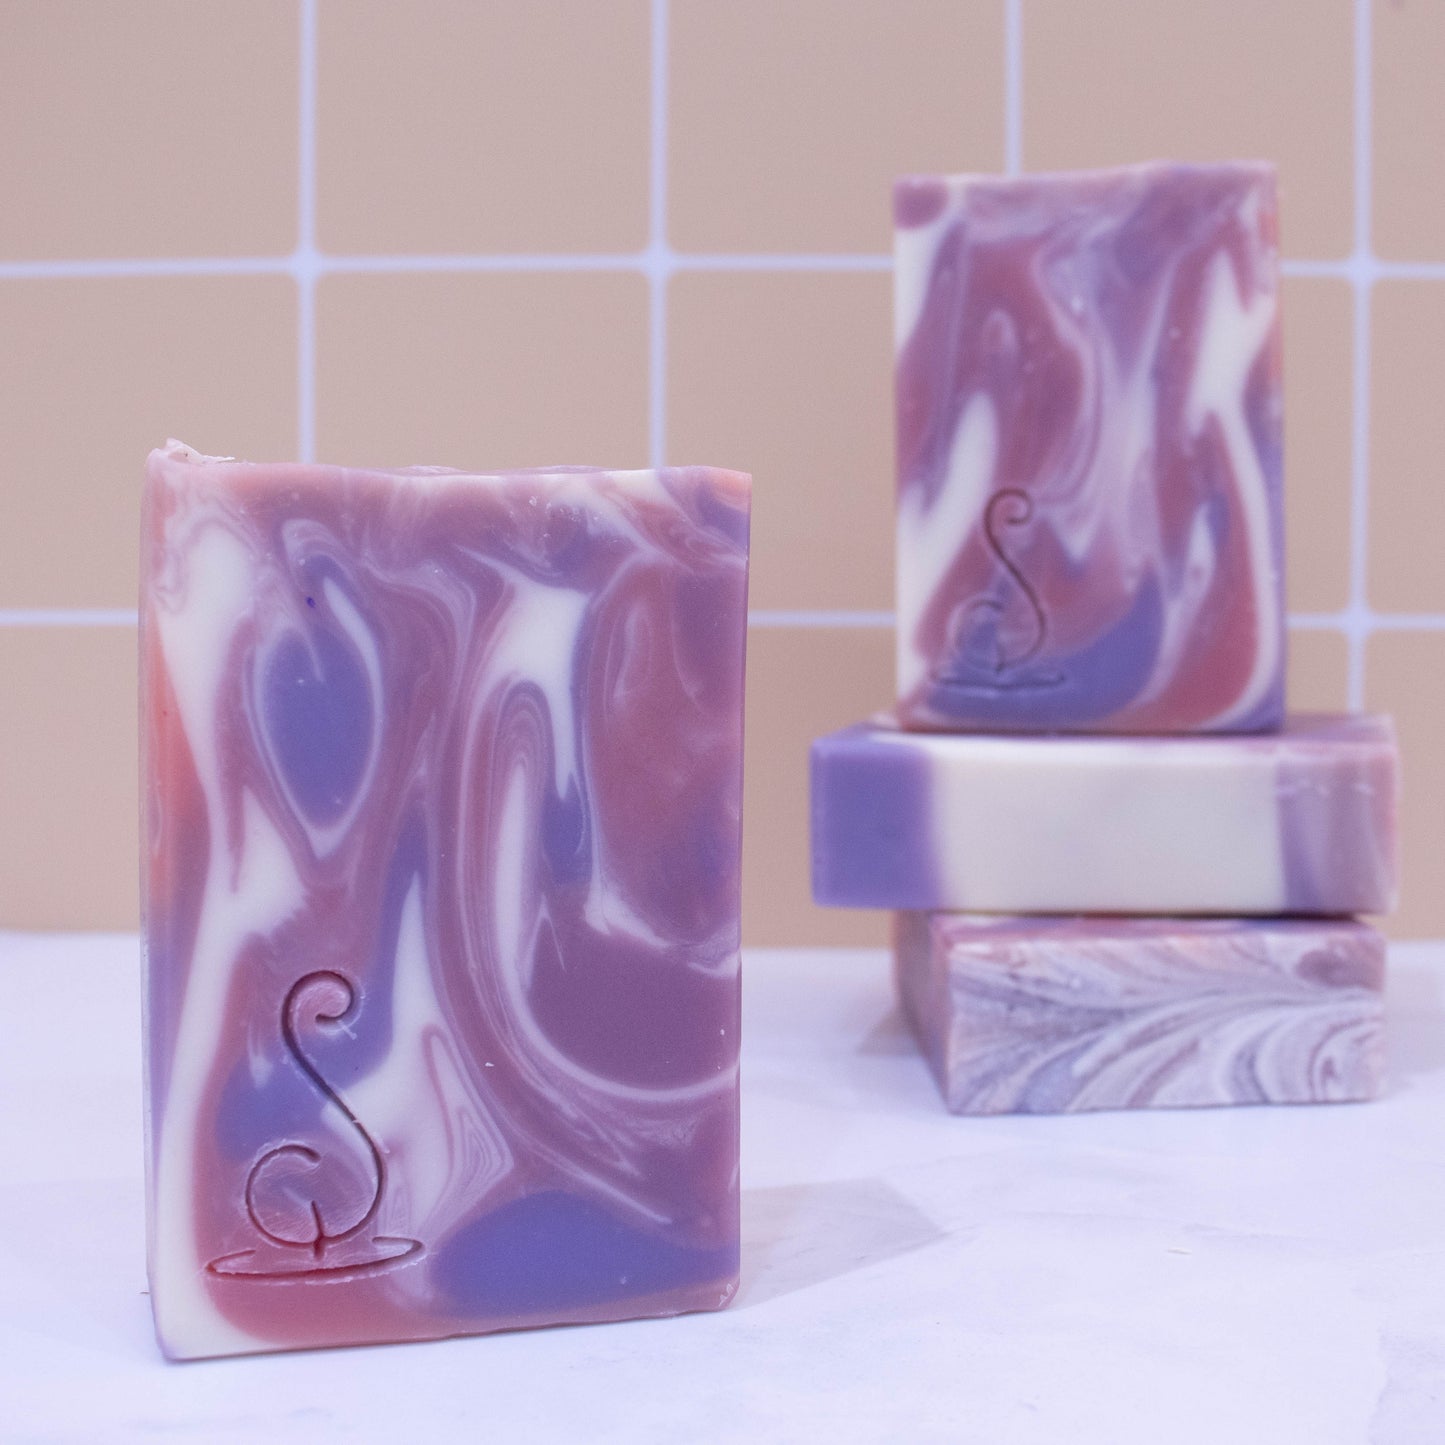 Four rectangular bars of soap sit on a marble bench each showing various design patterns from the same batch of soap. All soaps feature a swirling pattern of white, pink and purple soap but all have slight differences